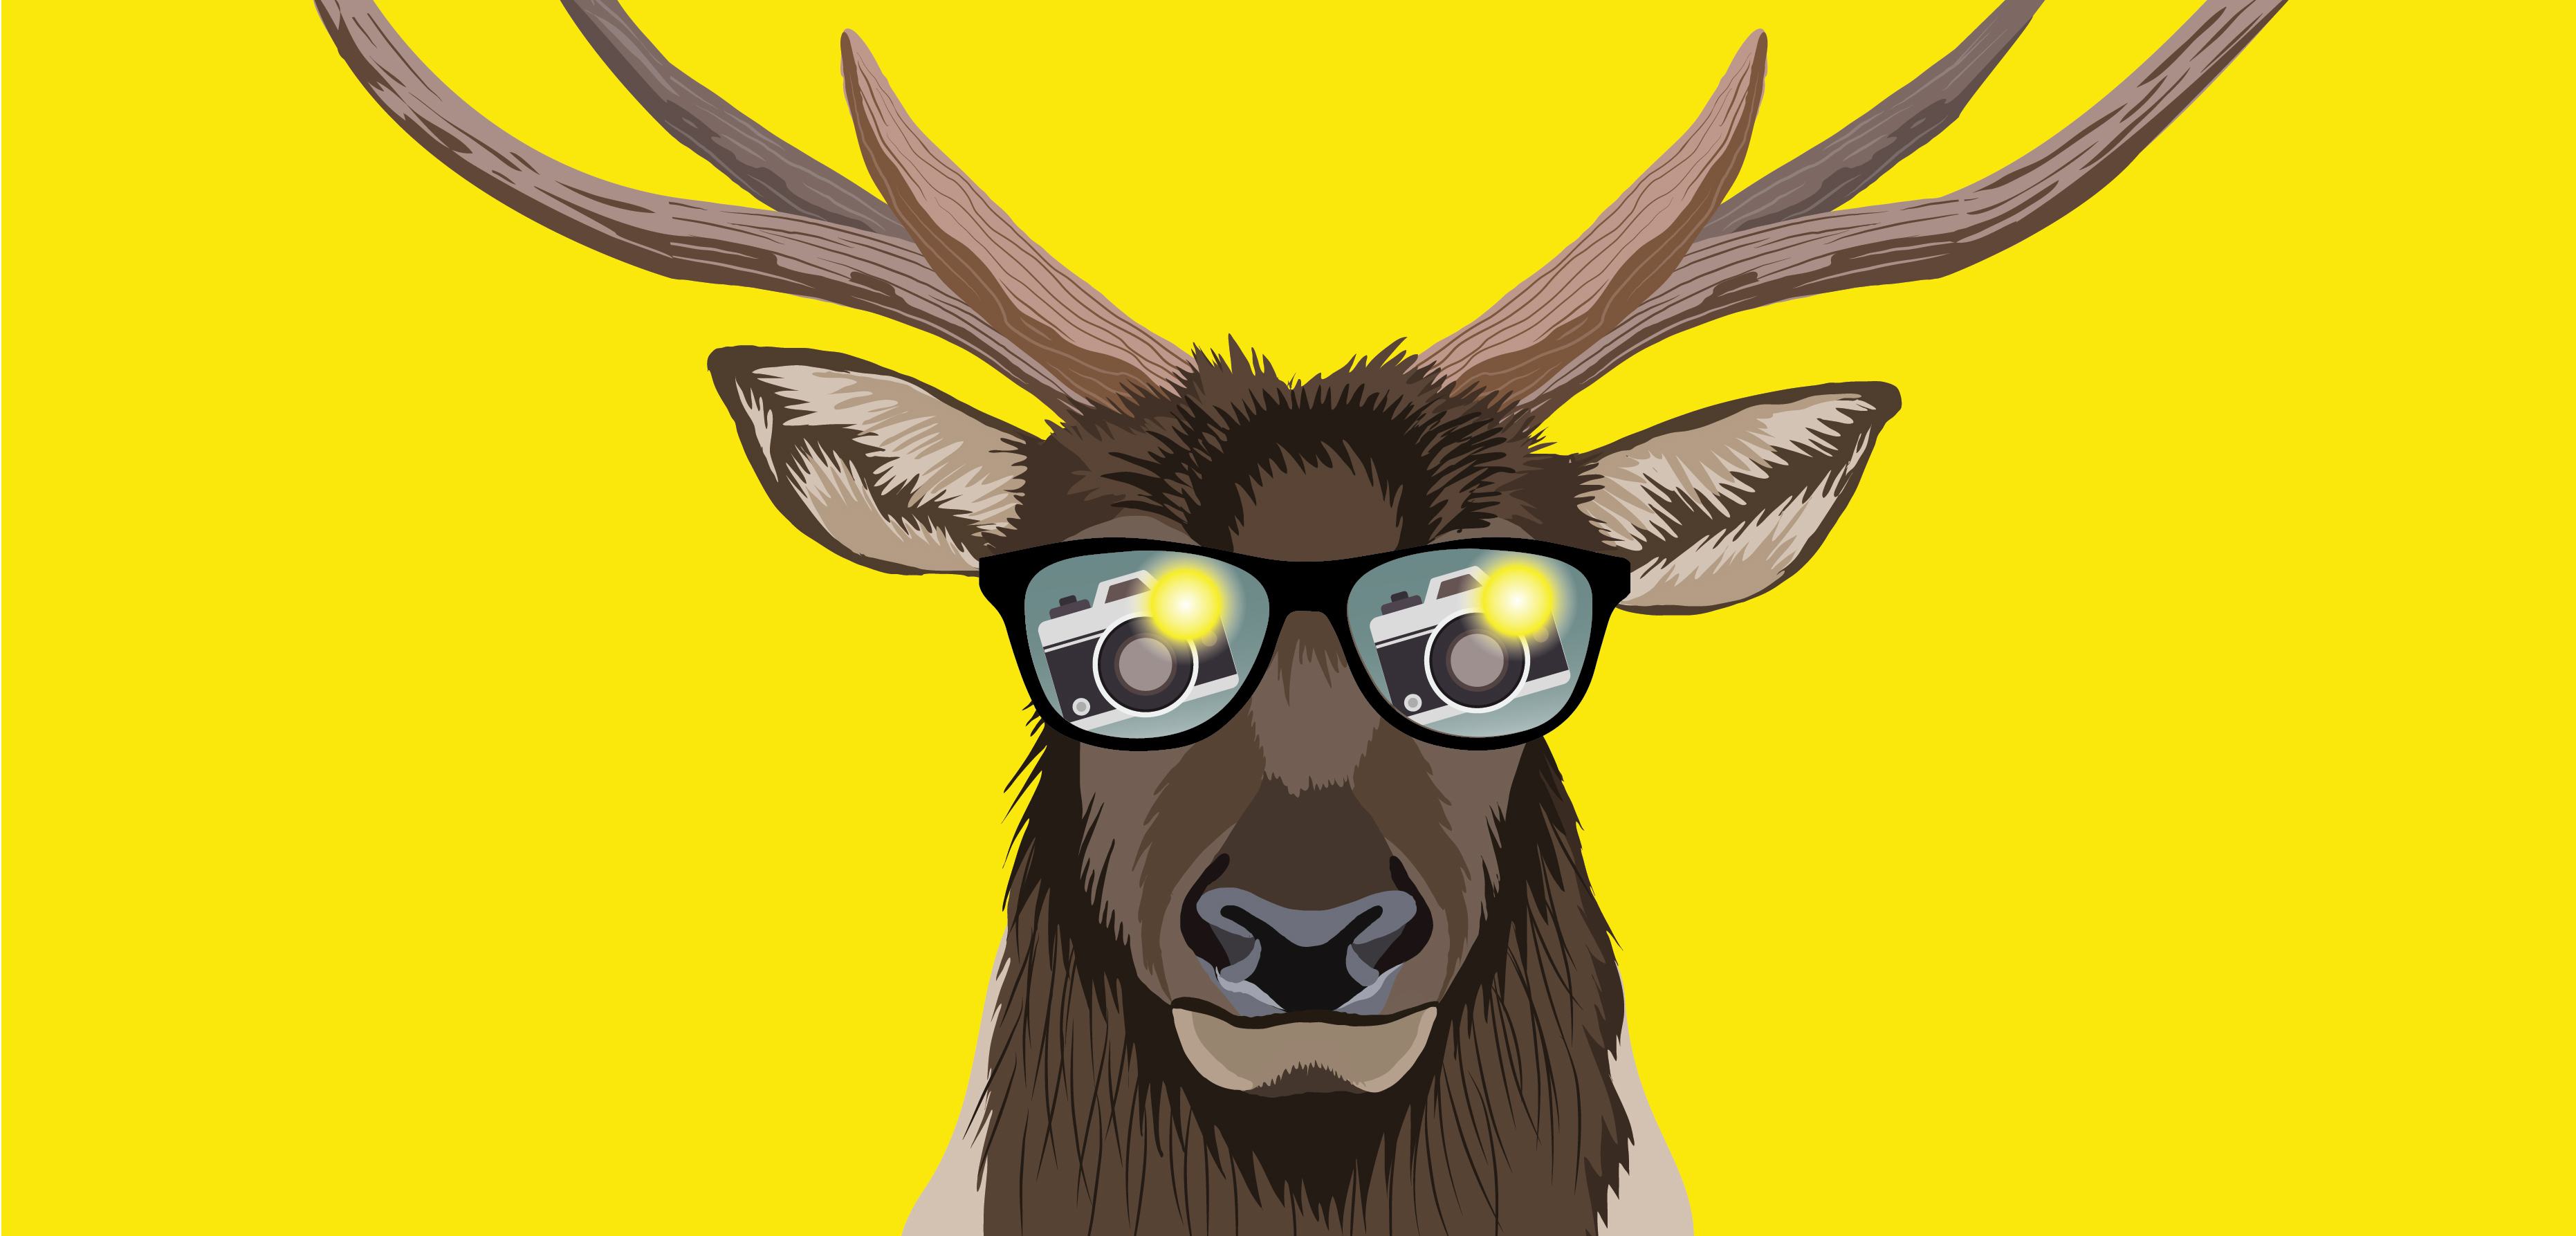 Drawing of an elk wearing sunglasses on a yellow background. A flashing camera is in the reflection of the sunglasses.